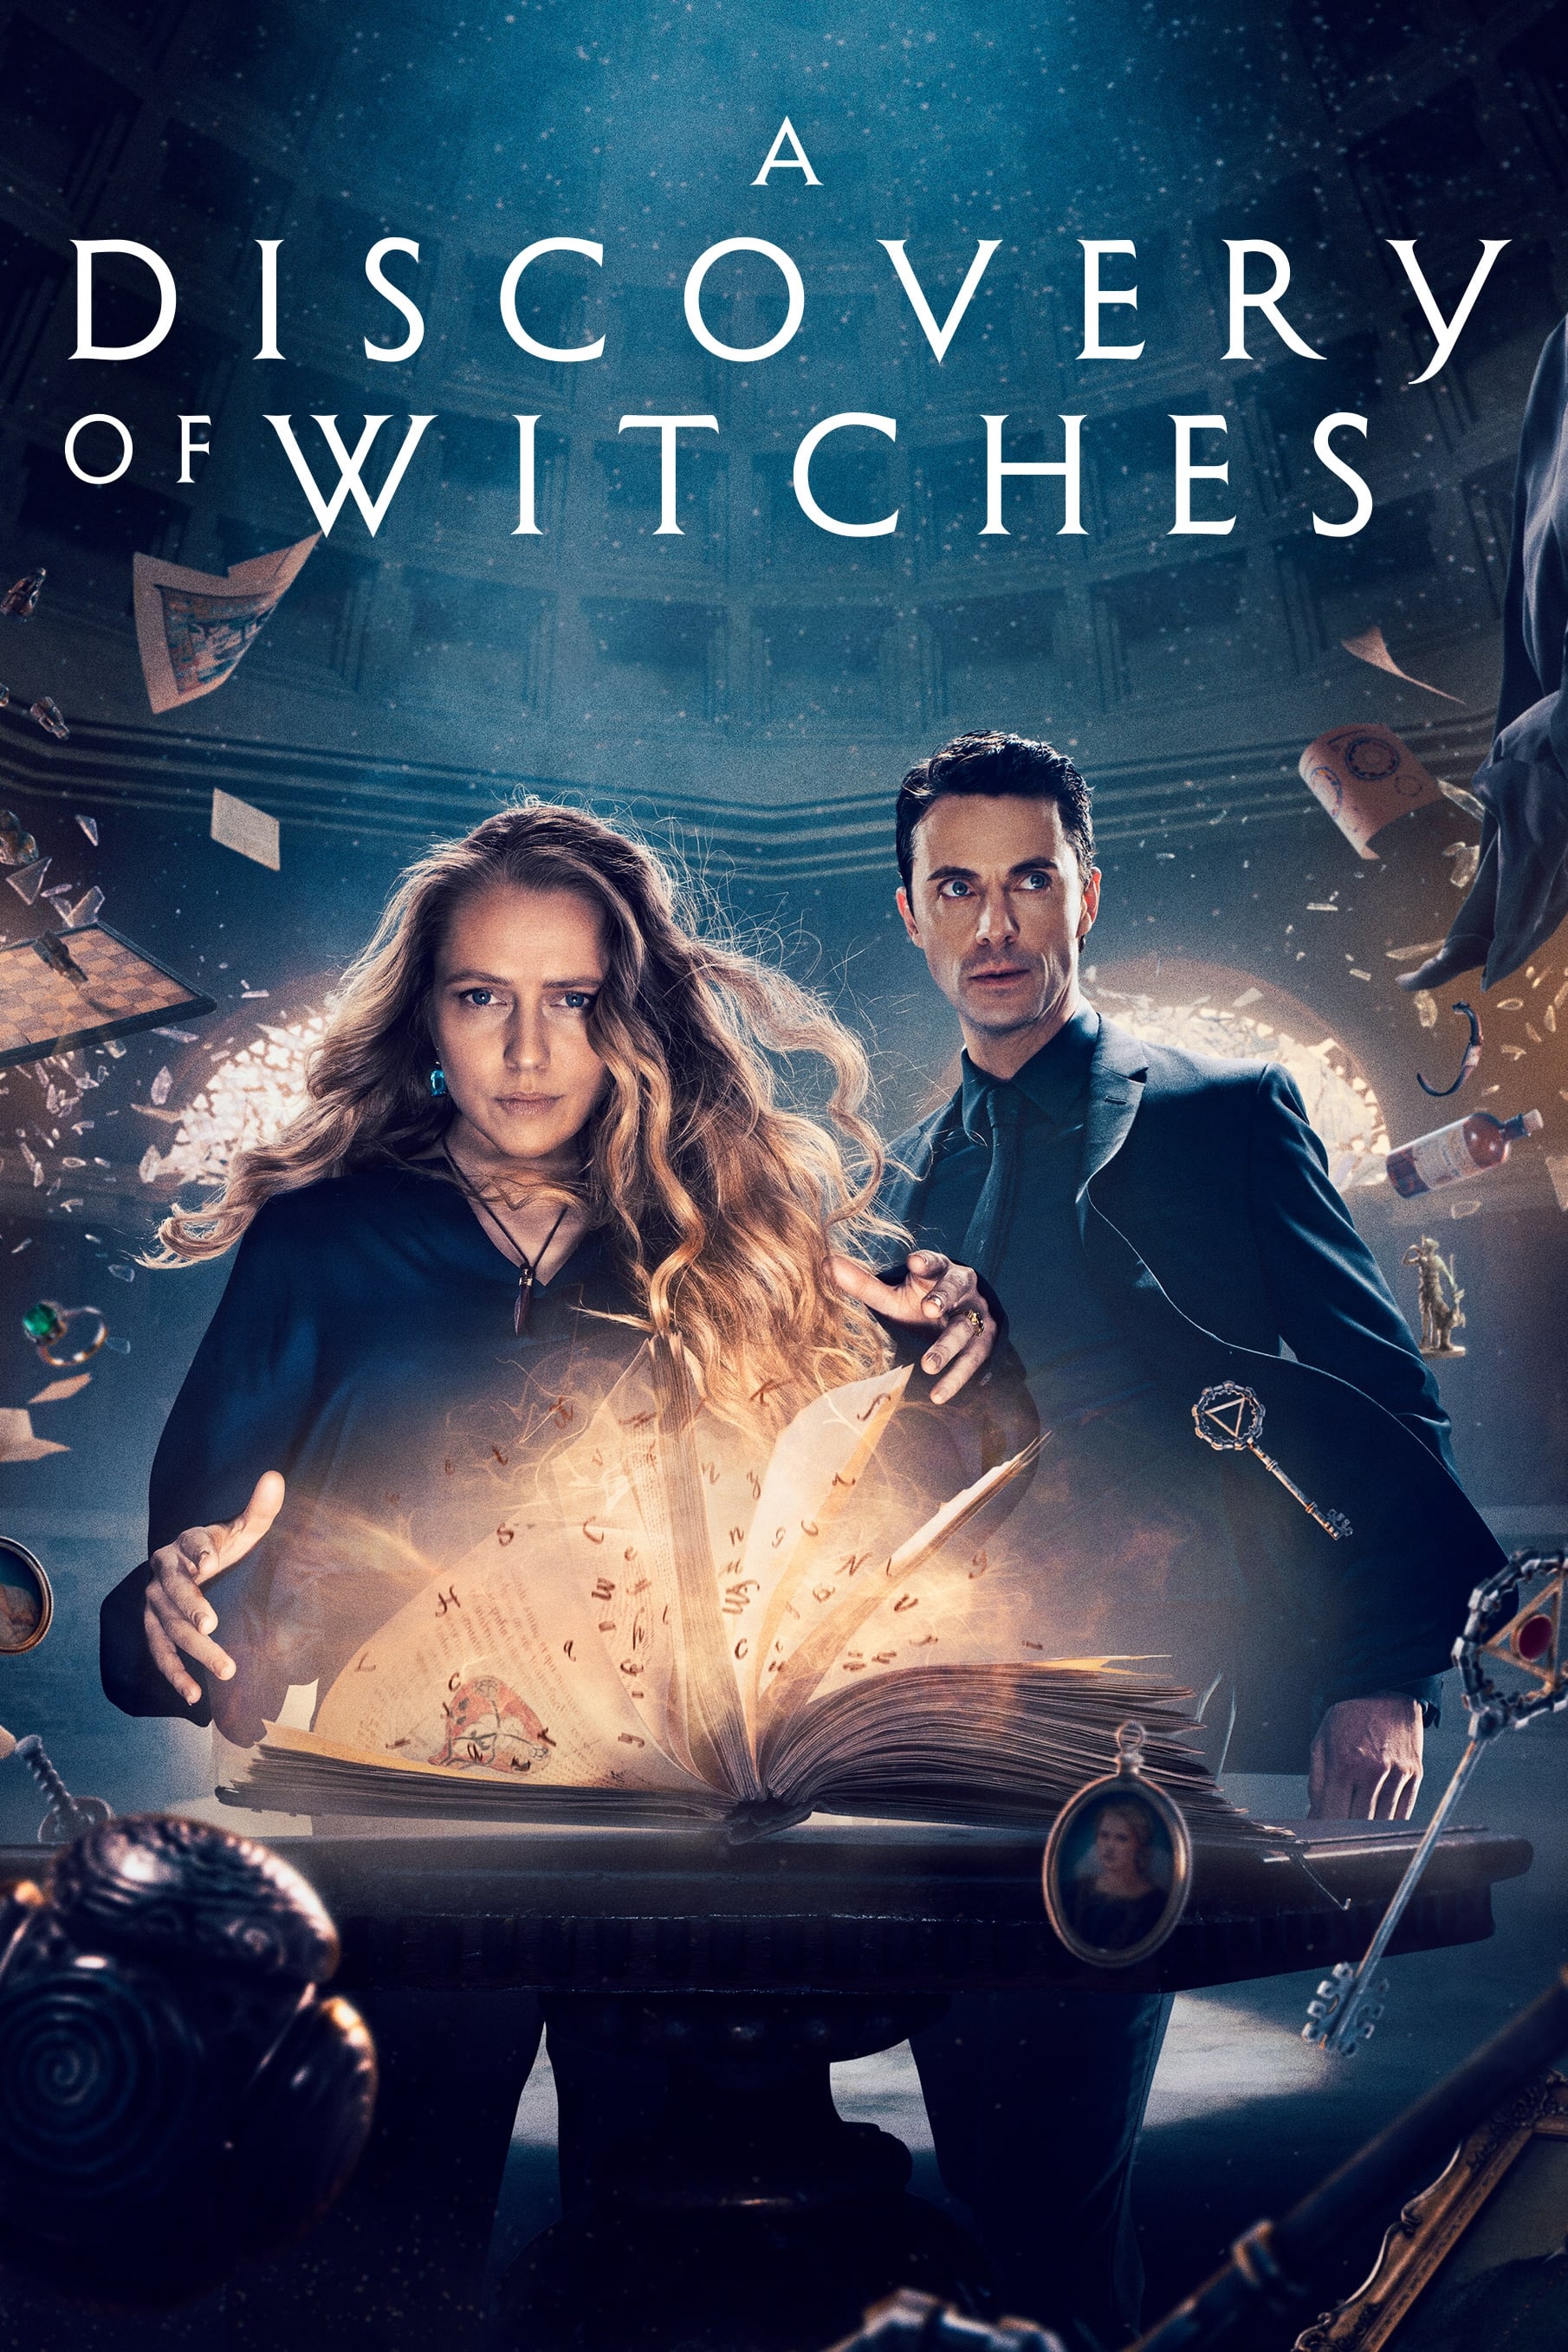 A Discovery of Witches TV Shows About Witchcraft